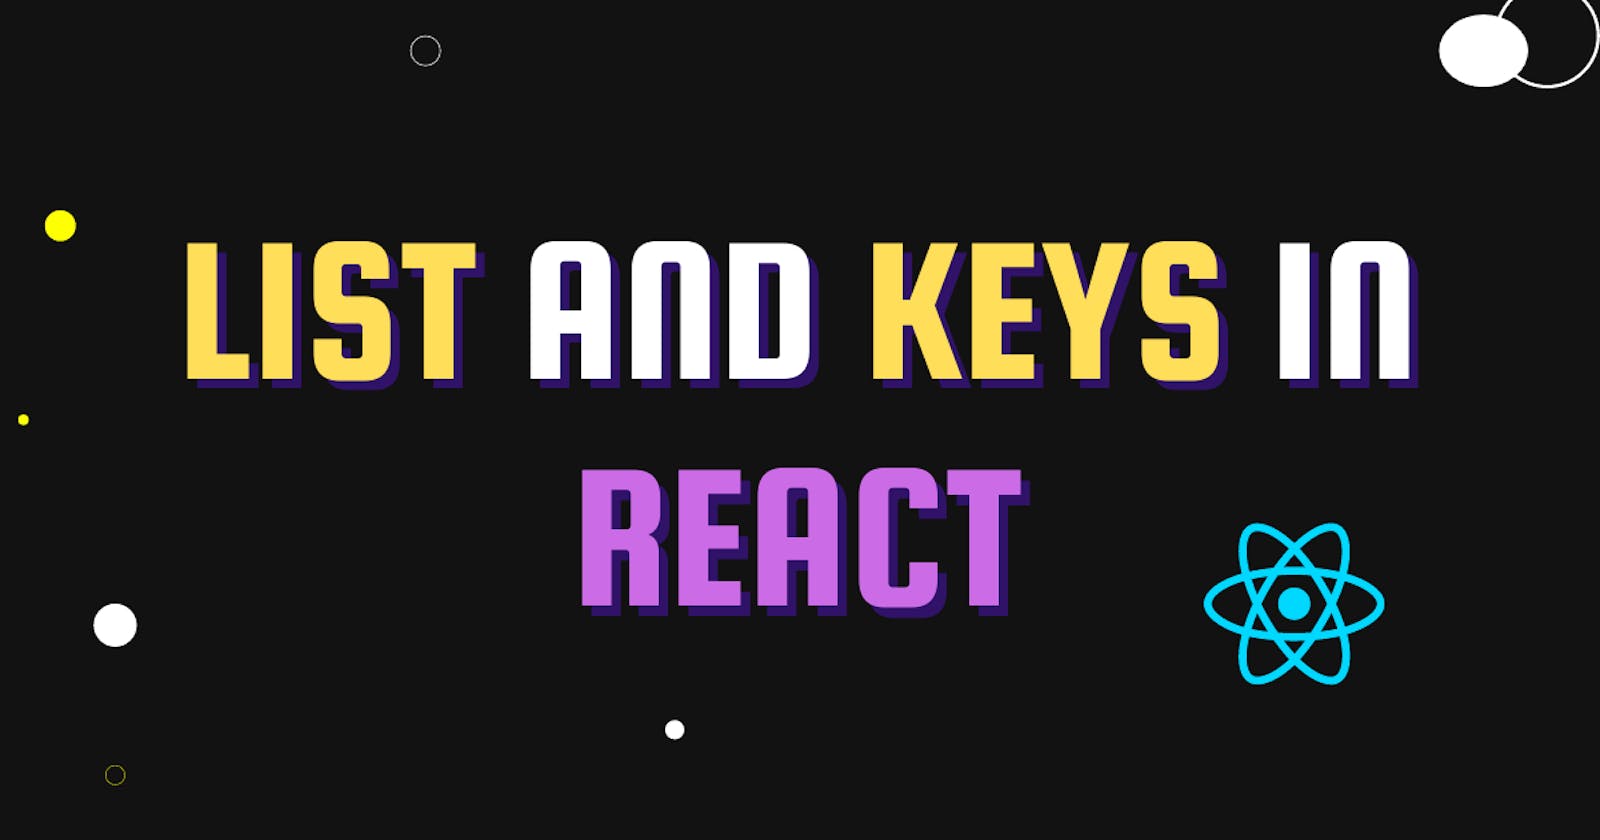 What are List and Keys in React?